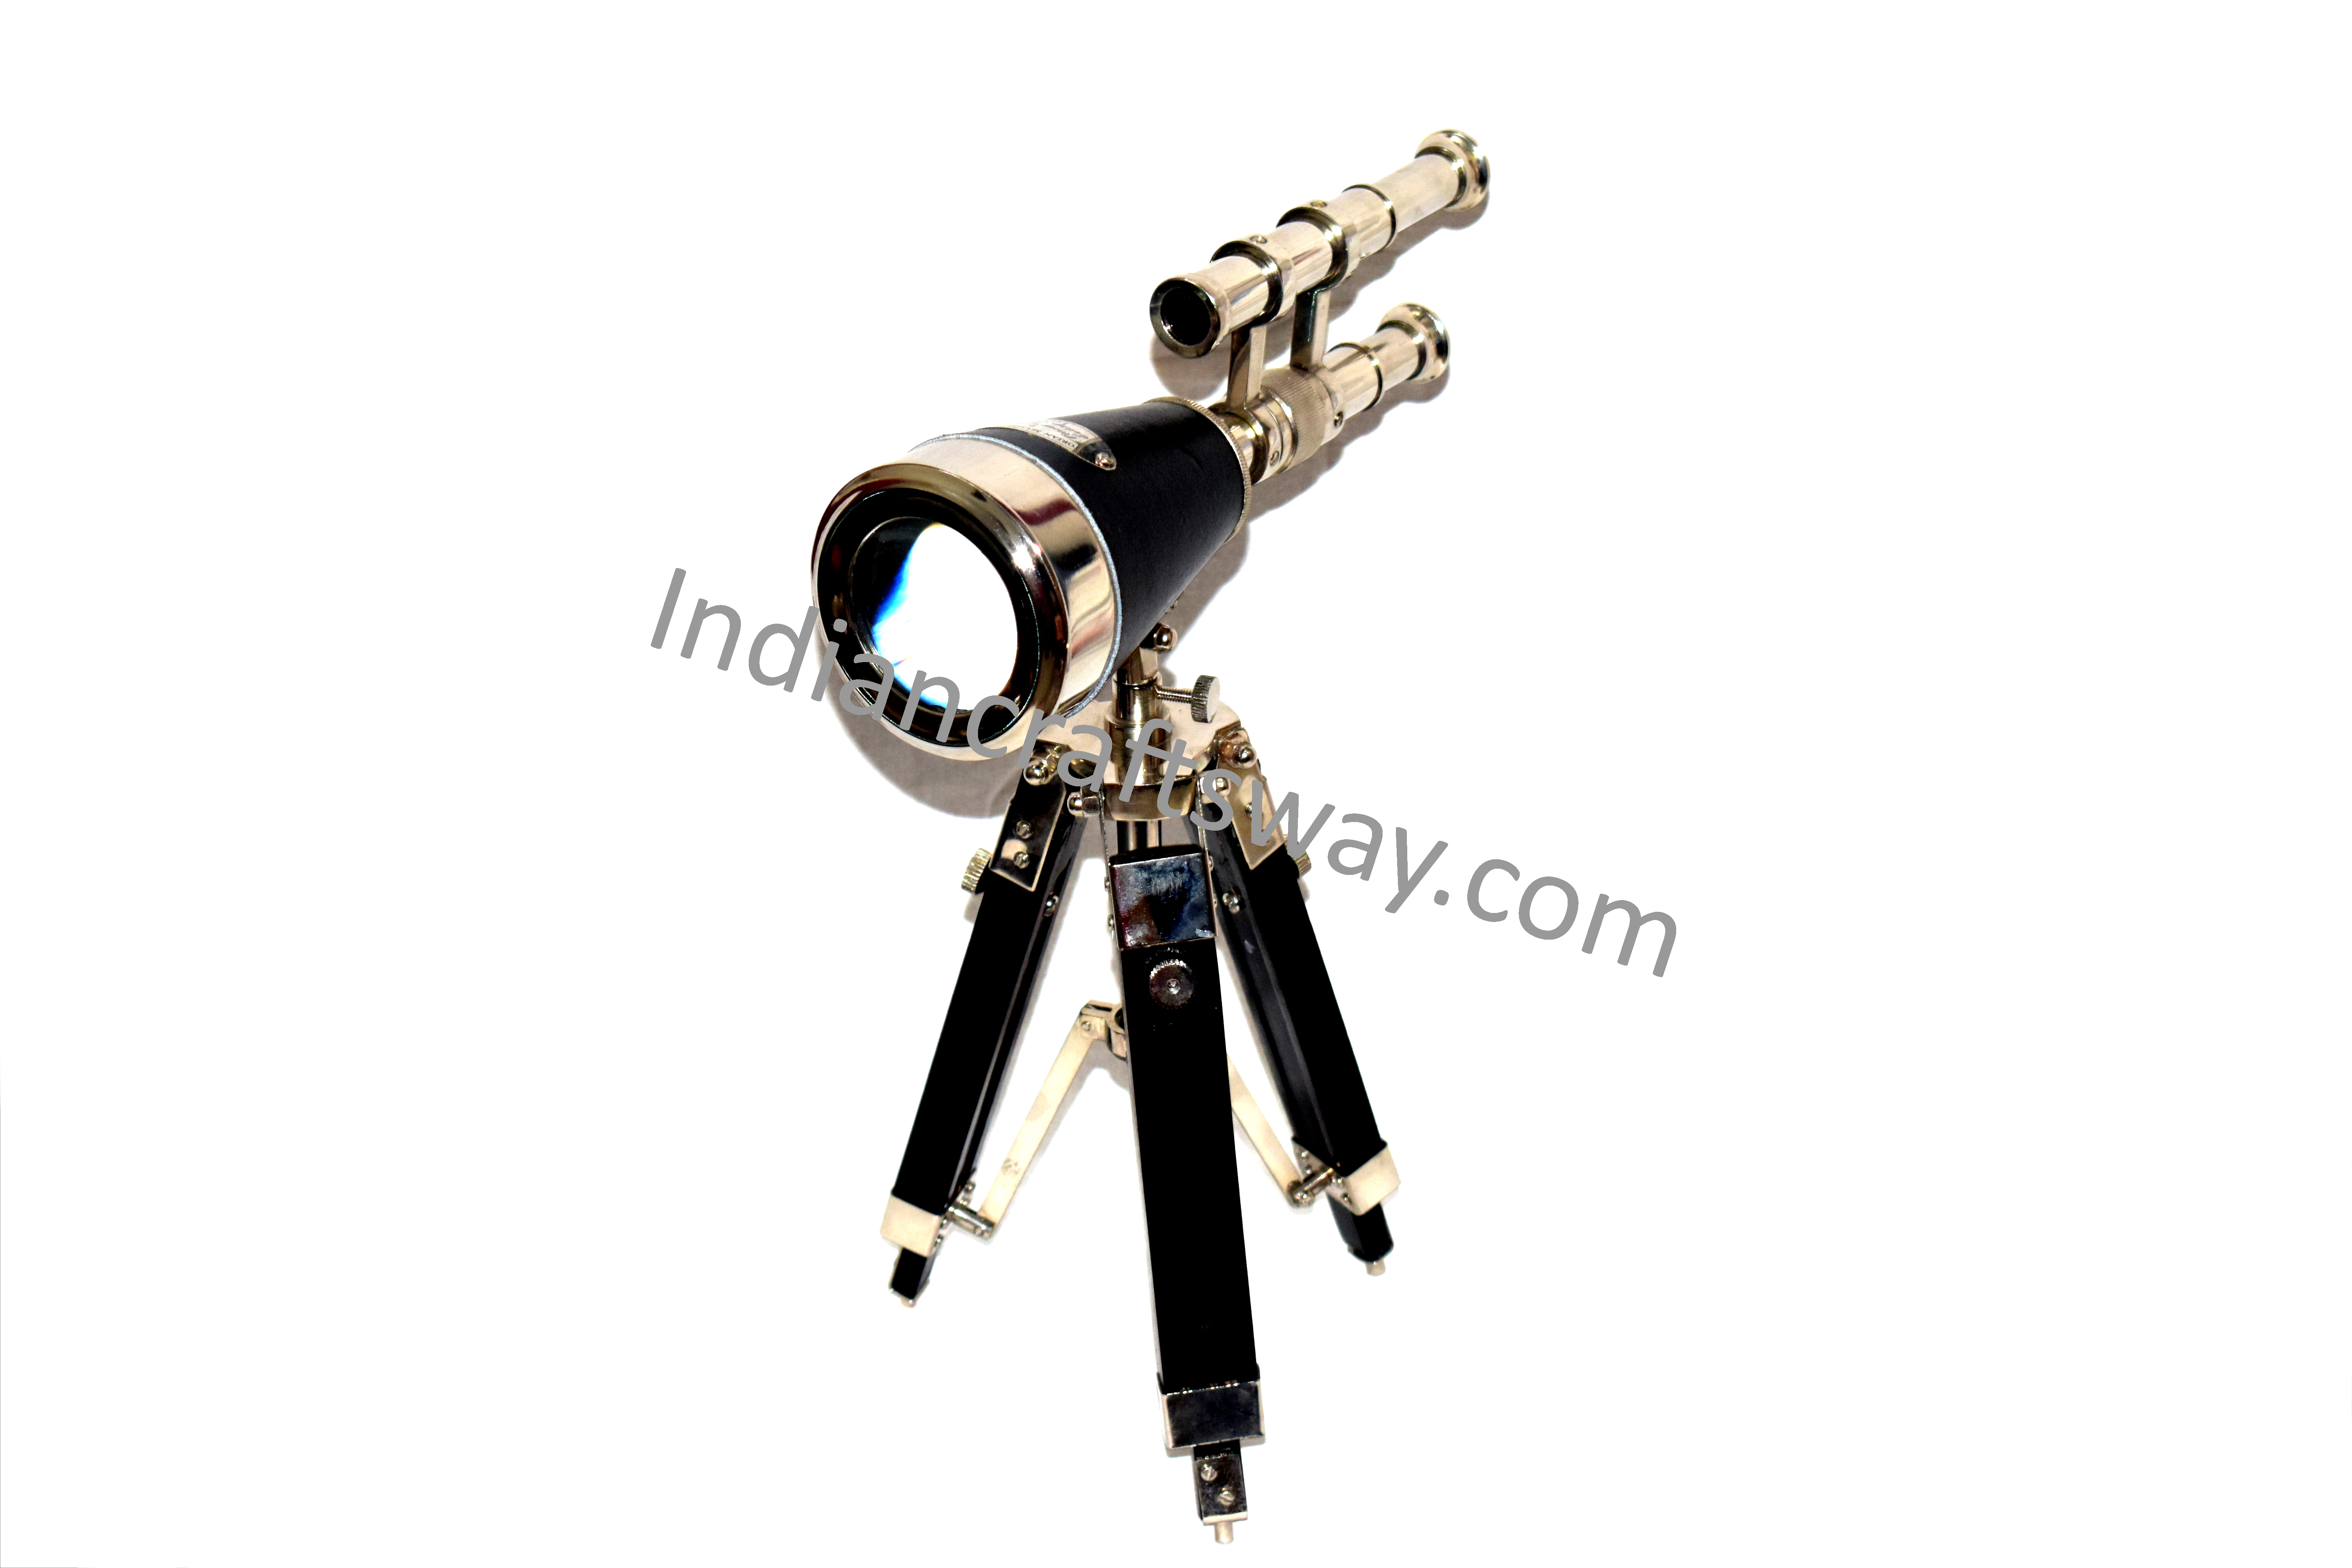 Antique brass telescope with stand BLK nickel finish